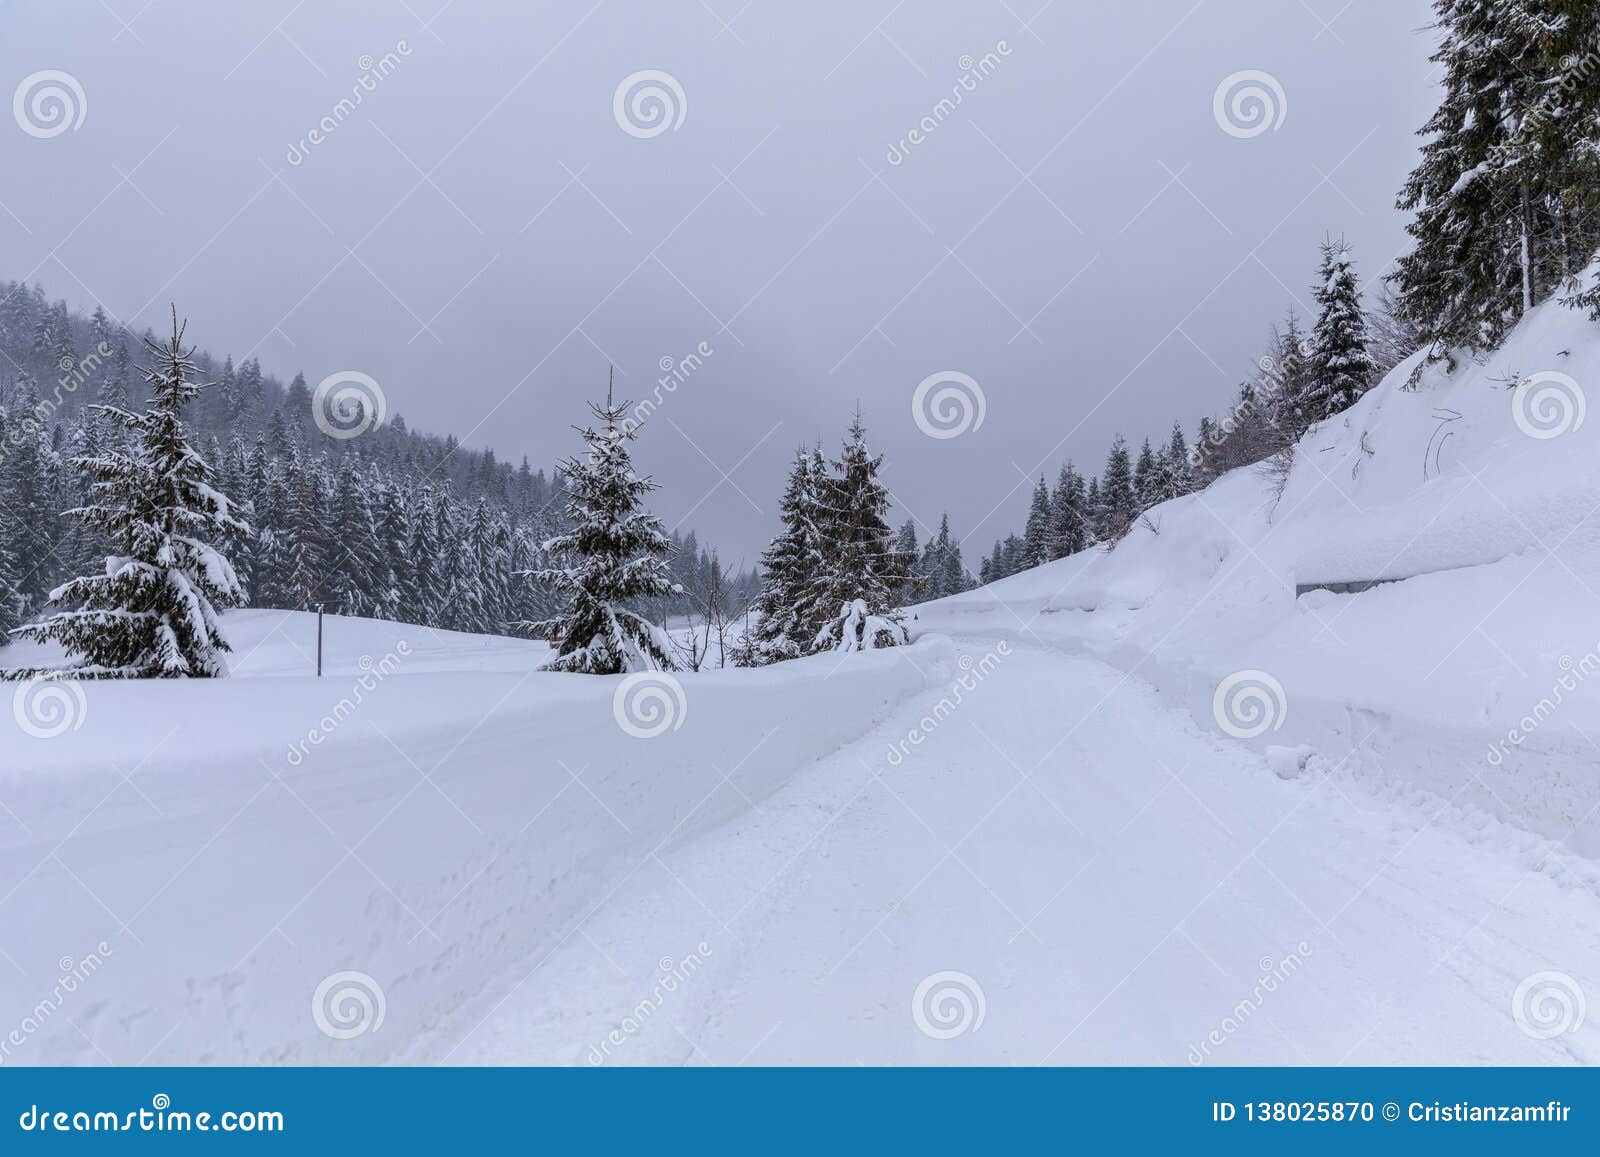 Landscape with Snowy Road in the Winter Stock Photo - Image of ridge ...